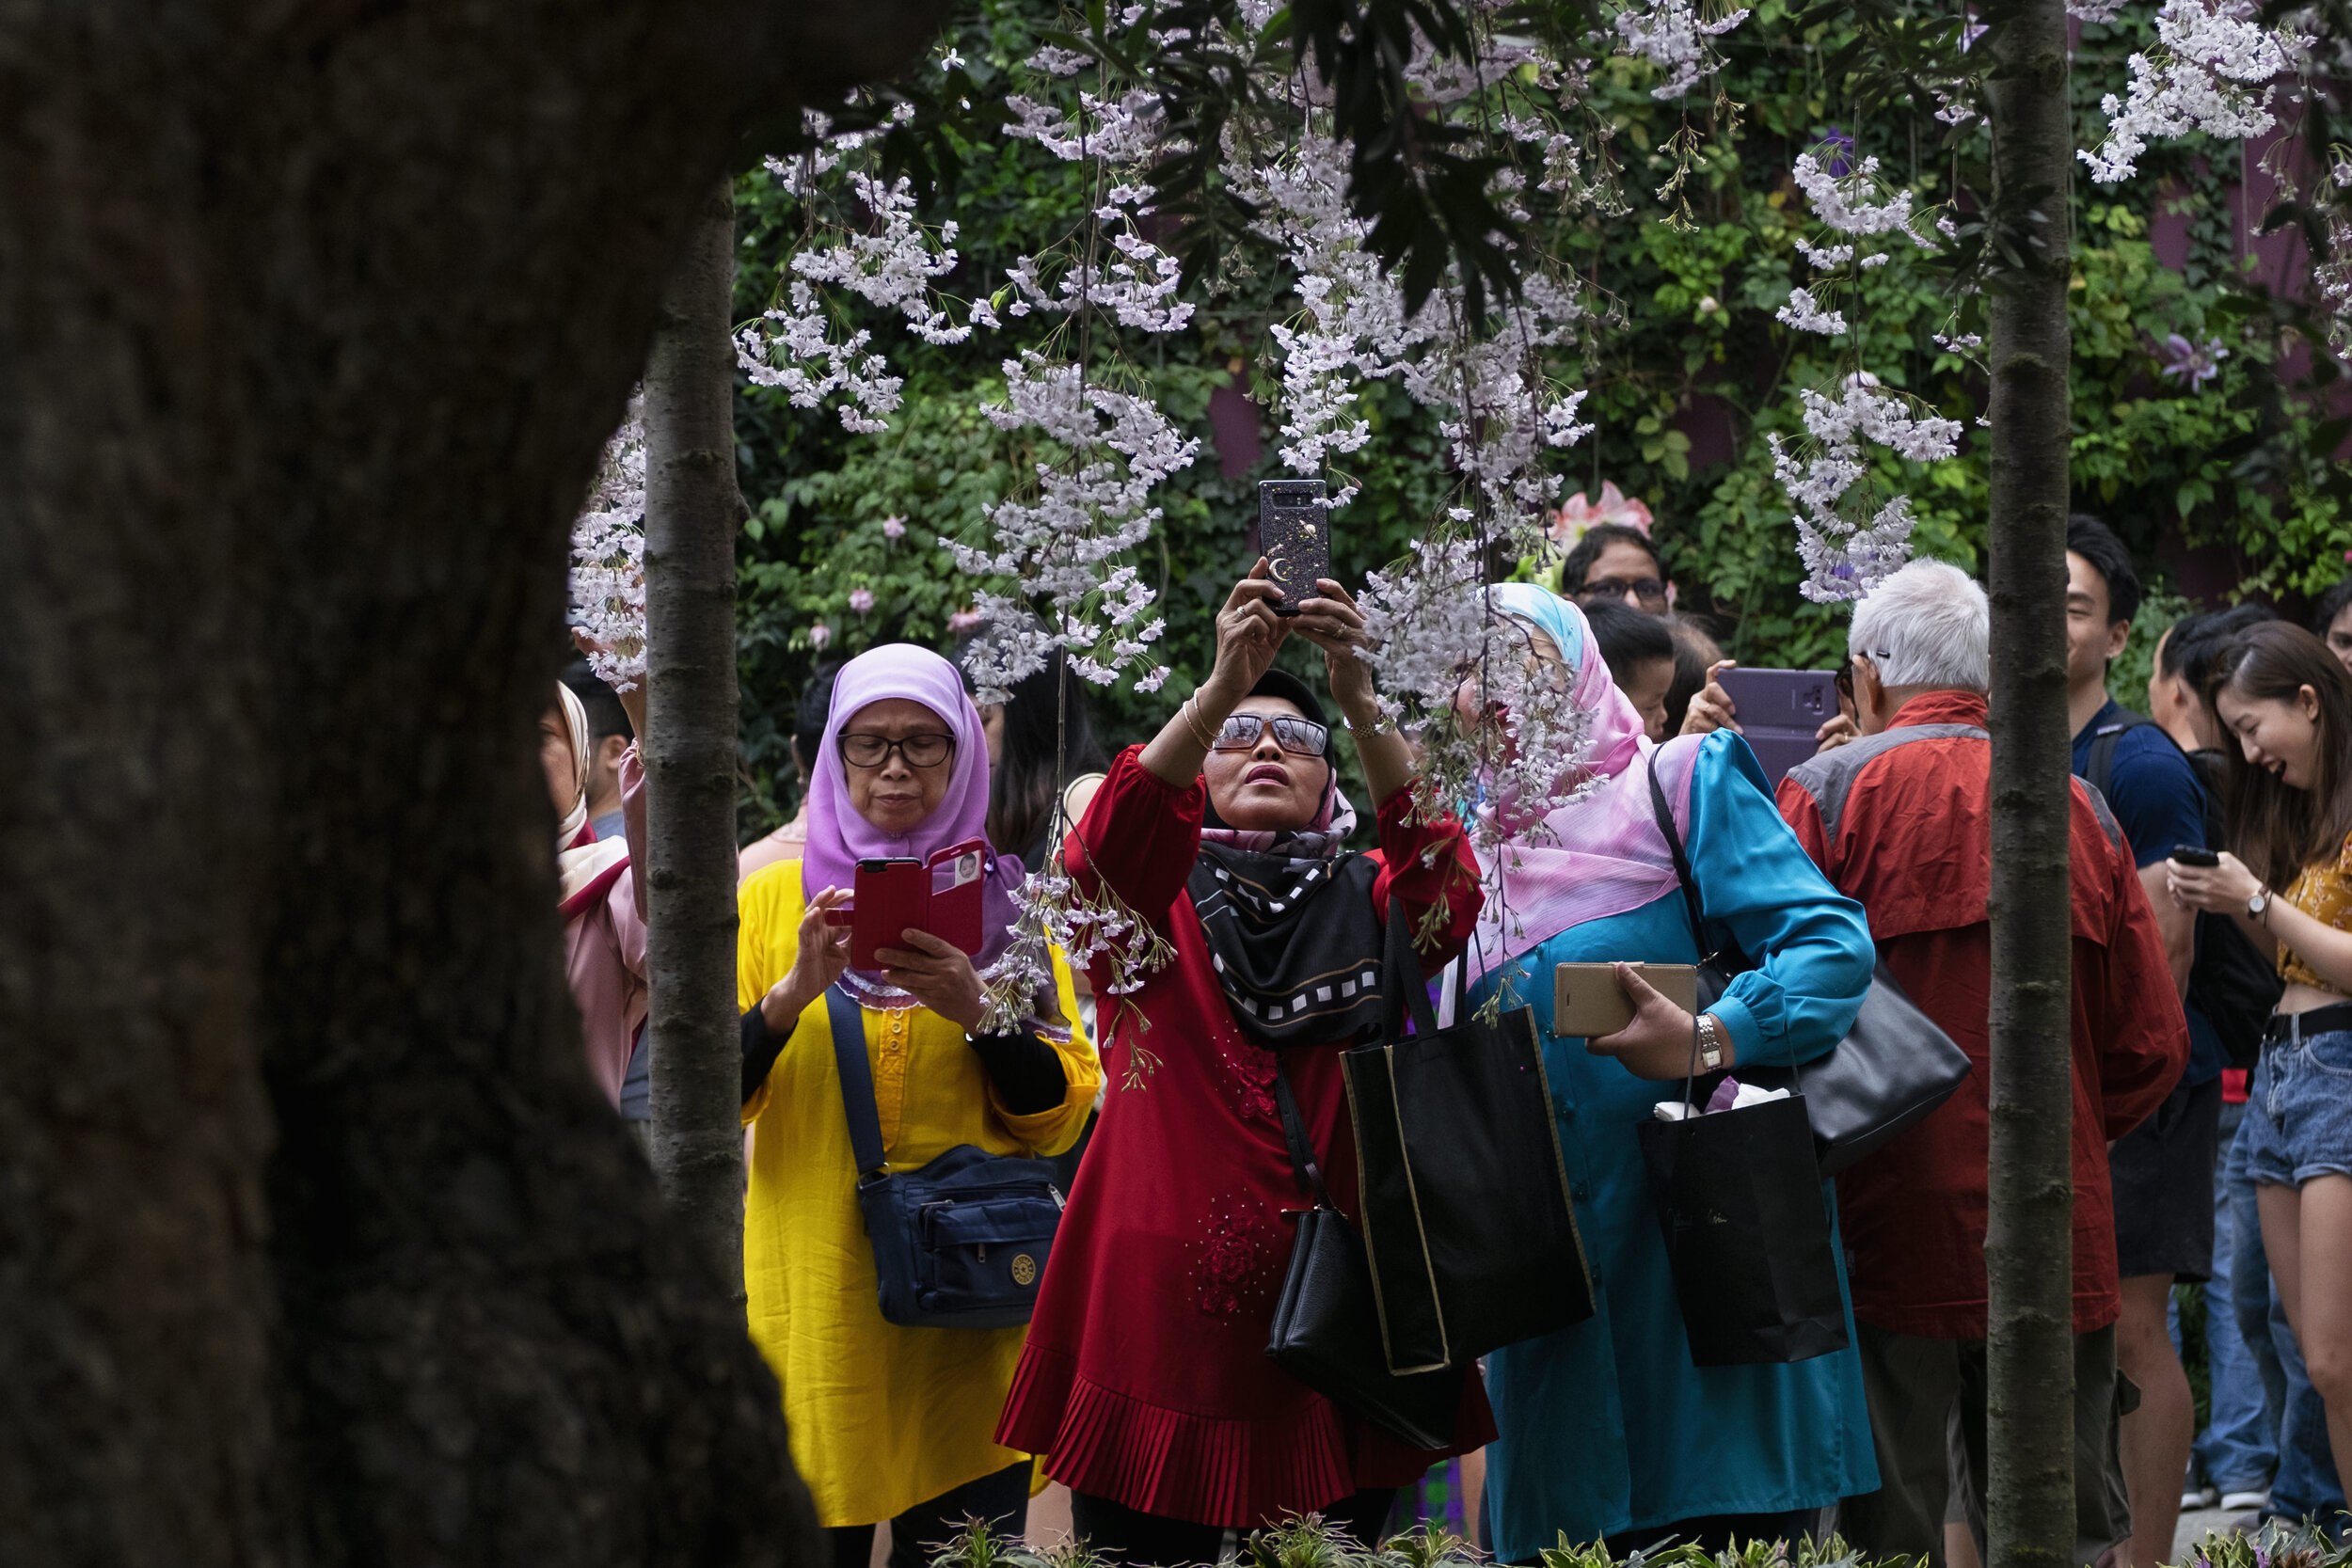  Women review and take pictures of cherry blossoms with their smartphones during the Sakura Matsuri floral display at Gardens by the Bay in Singapore 